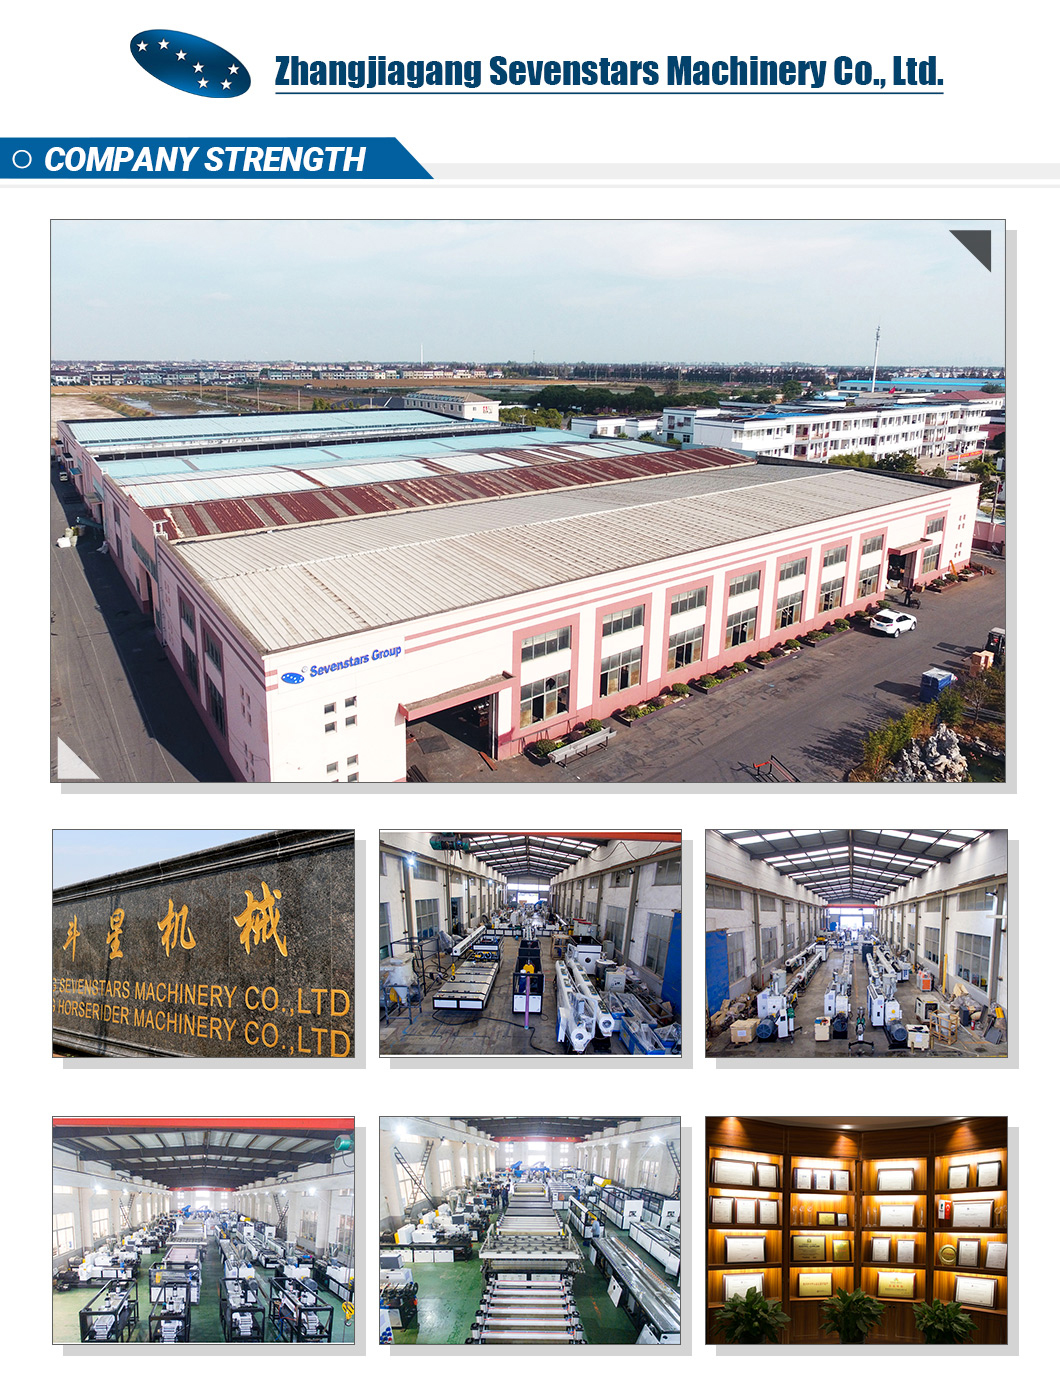 Overview Of Our Factory